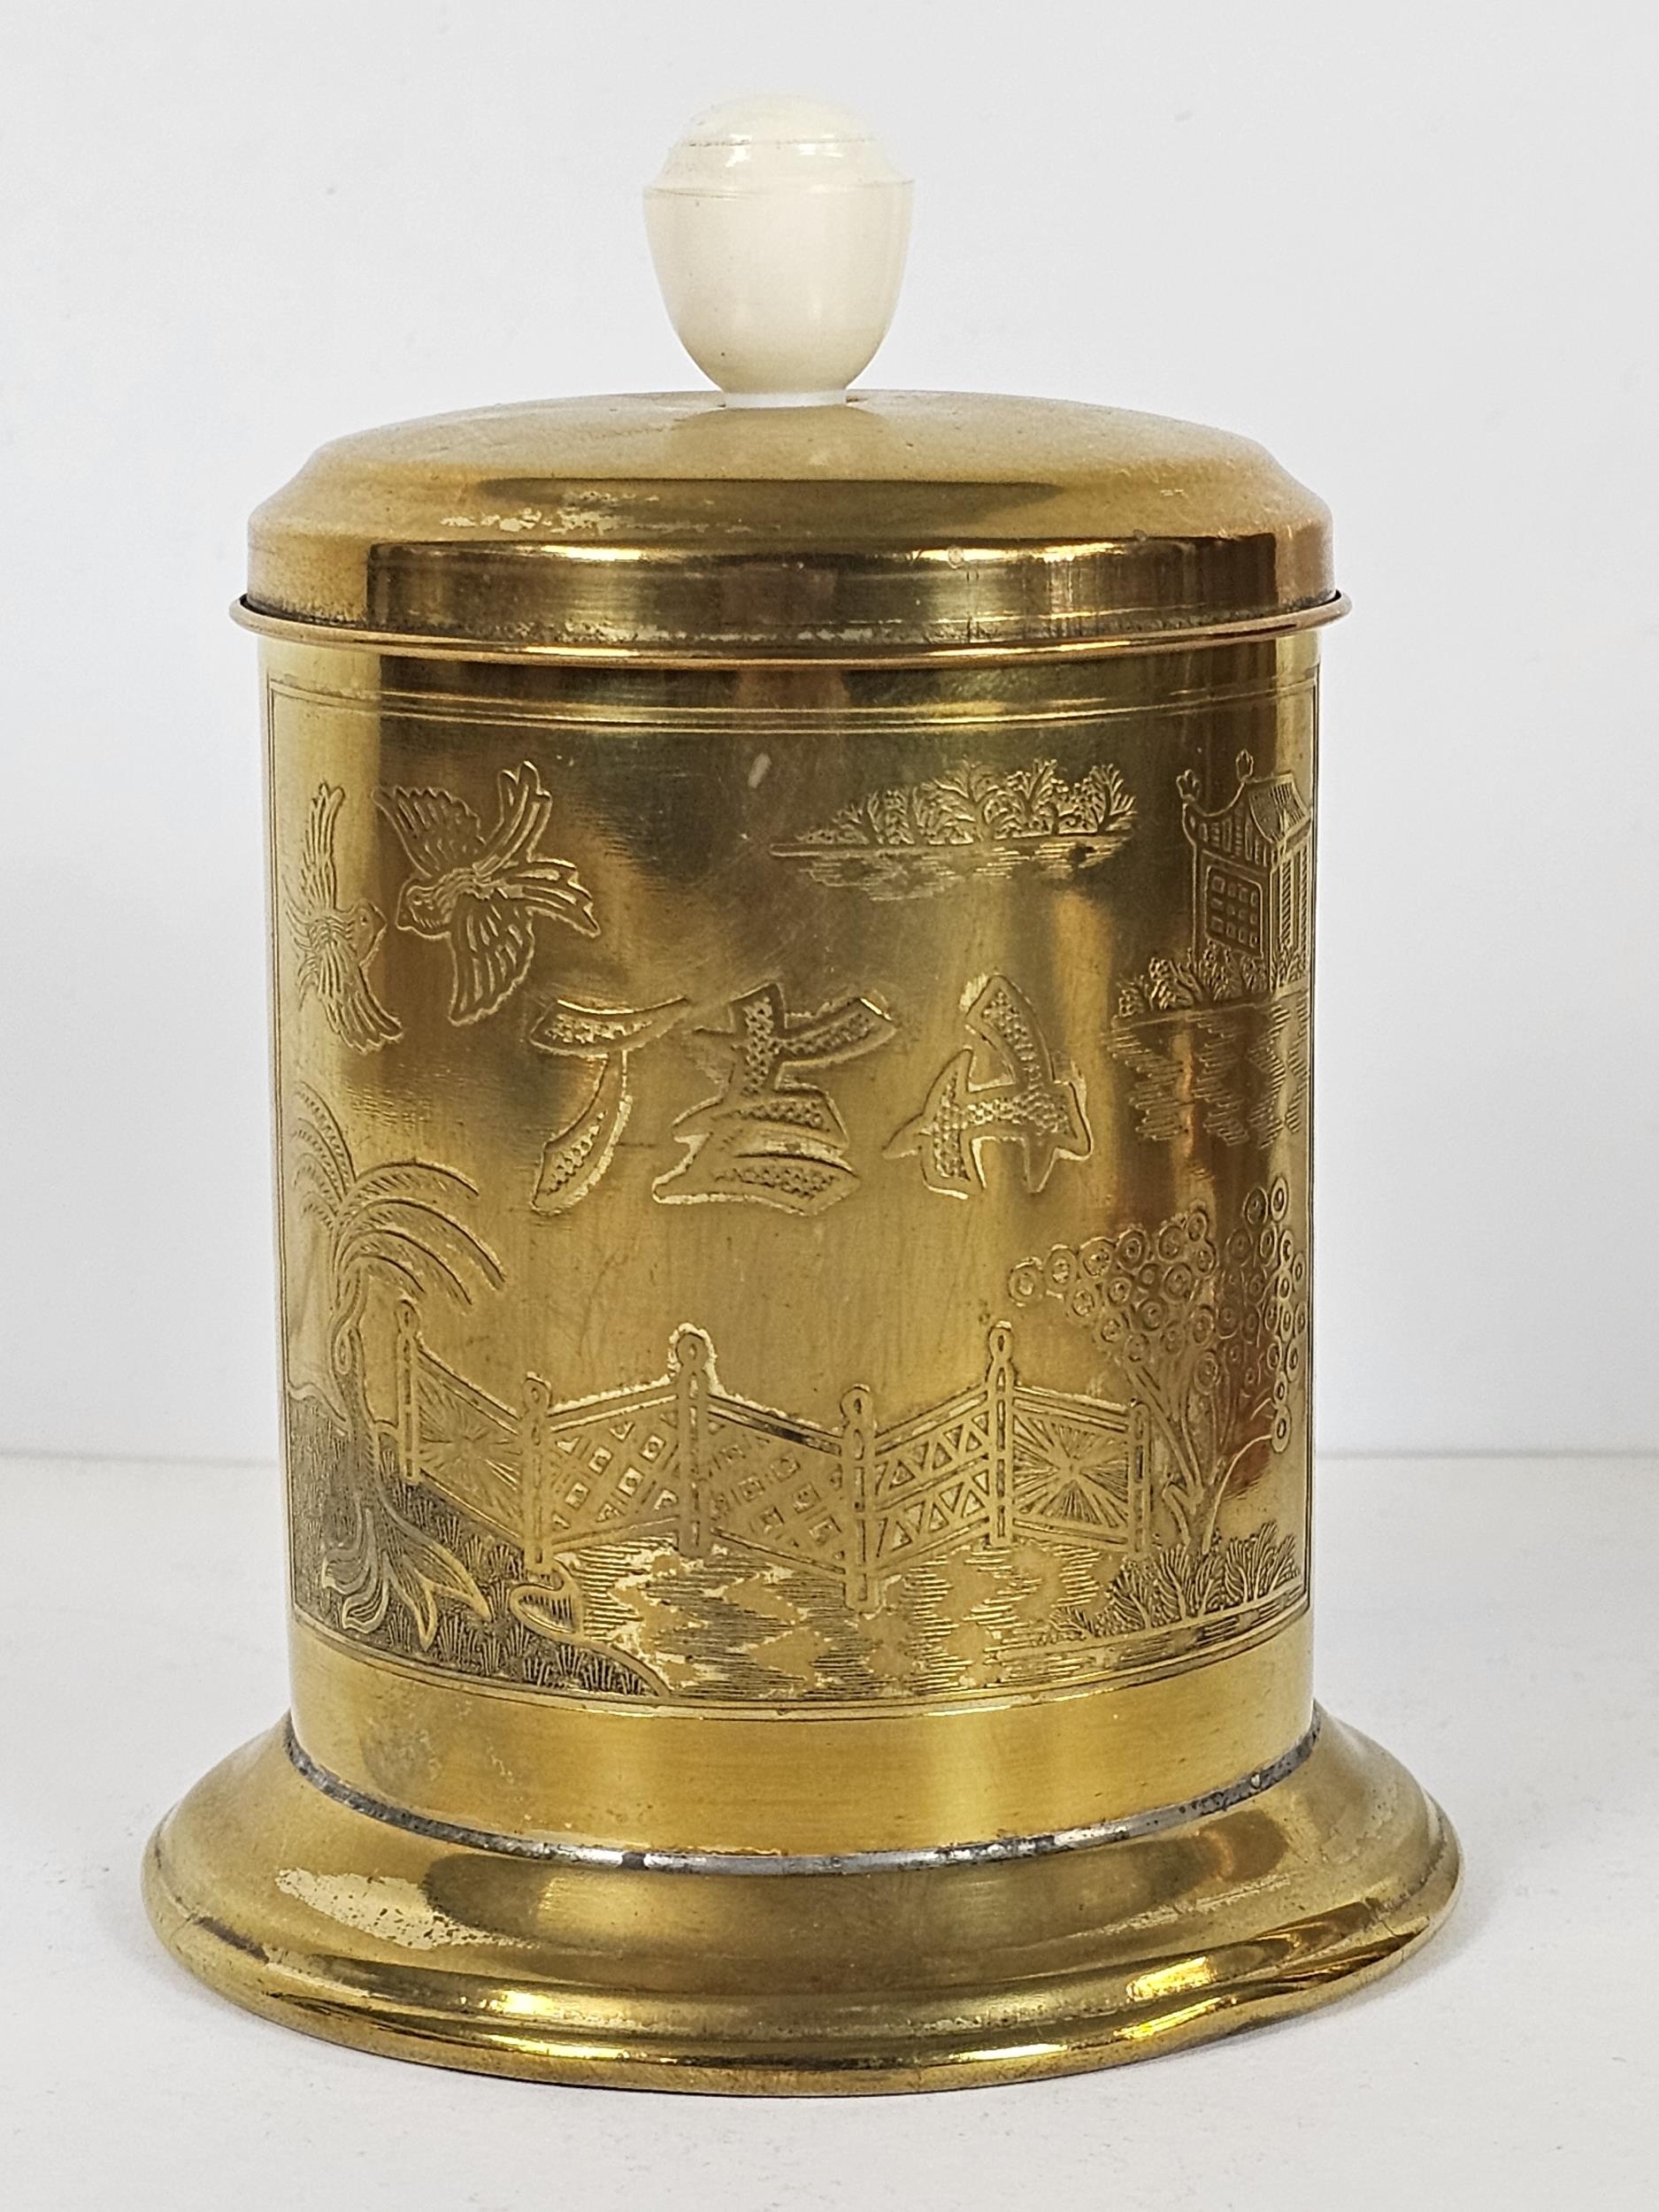 A quantity of commemorative brass and copper tea caddys and caddy spoons - Image 11 of 11